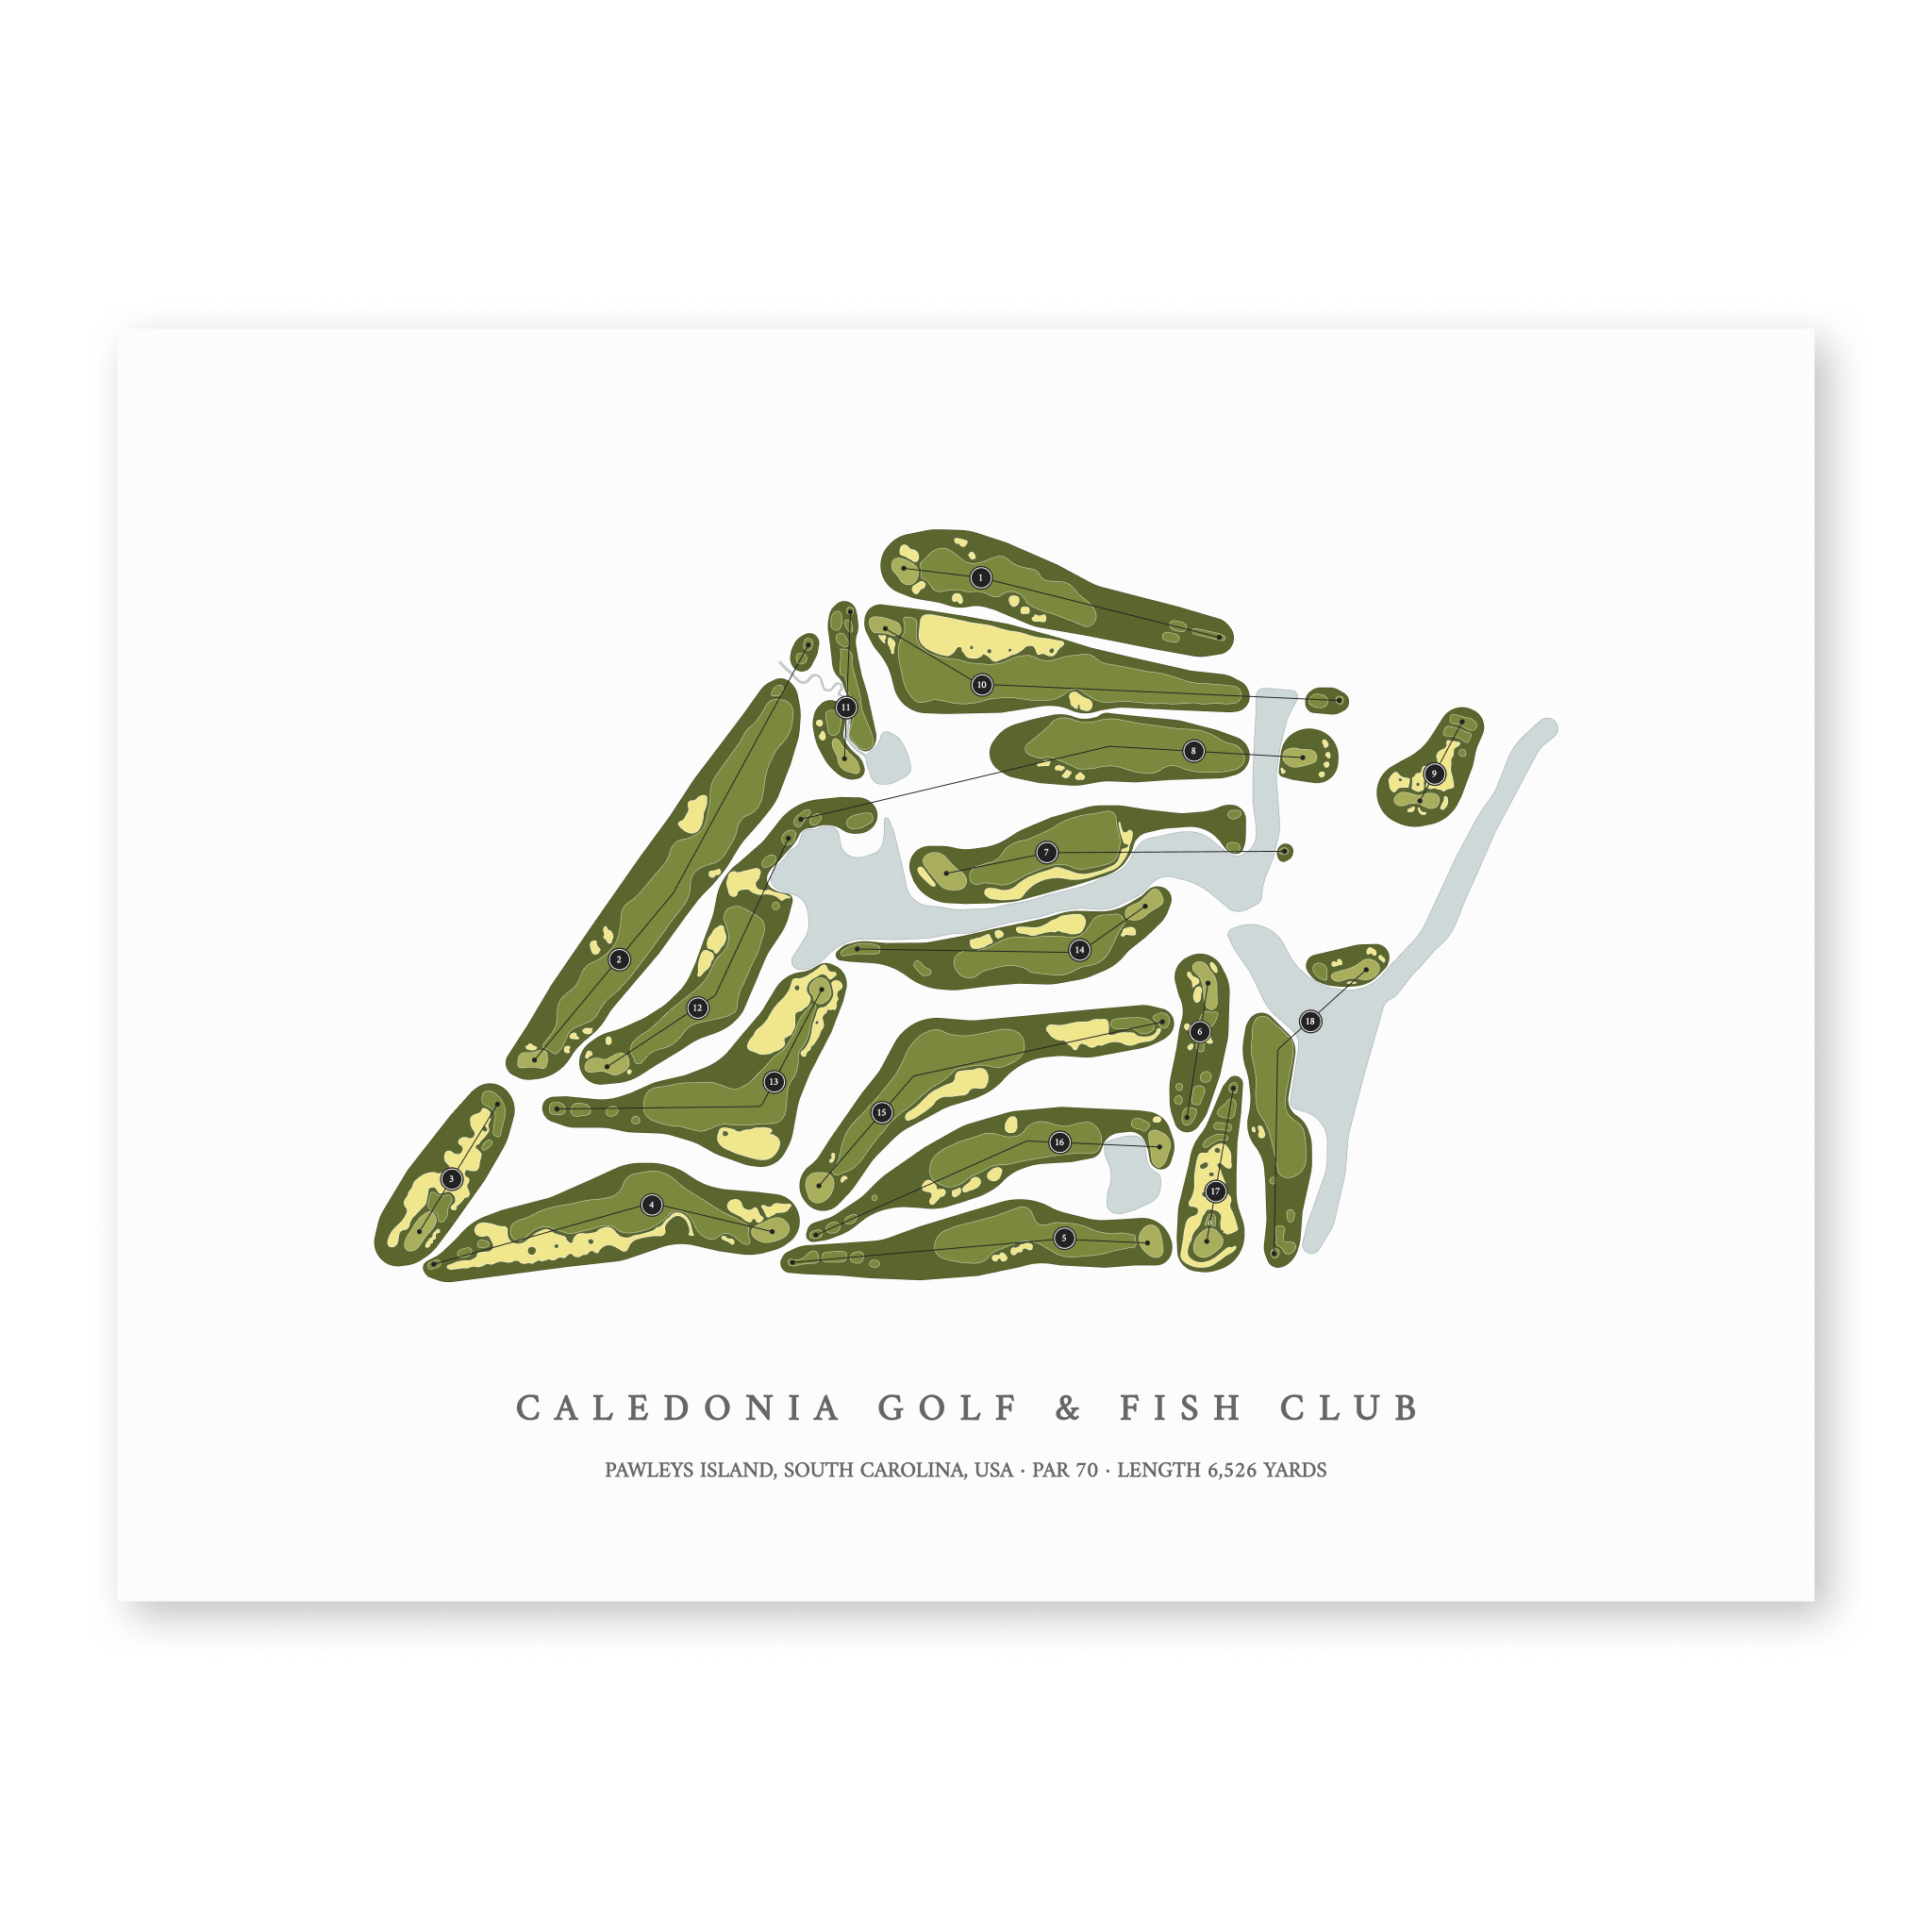 Caledonia Golf & Fish Club| Golf Course Print | Unframed With Hole Numbers #hole numbers_yes